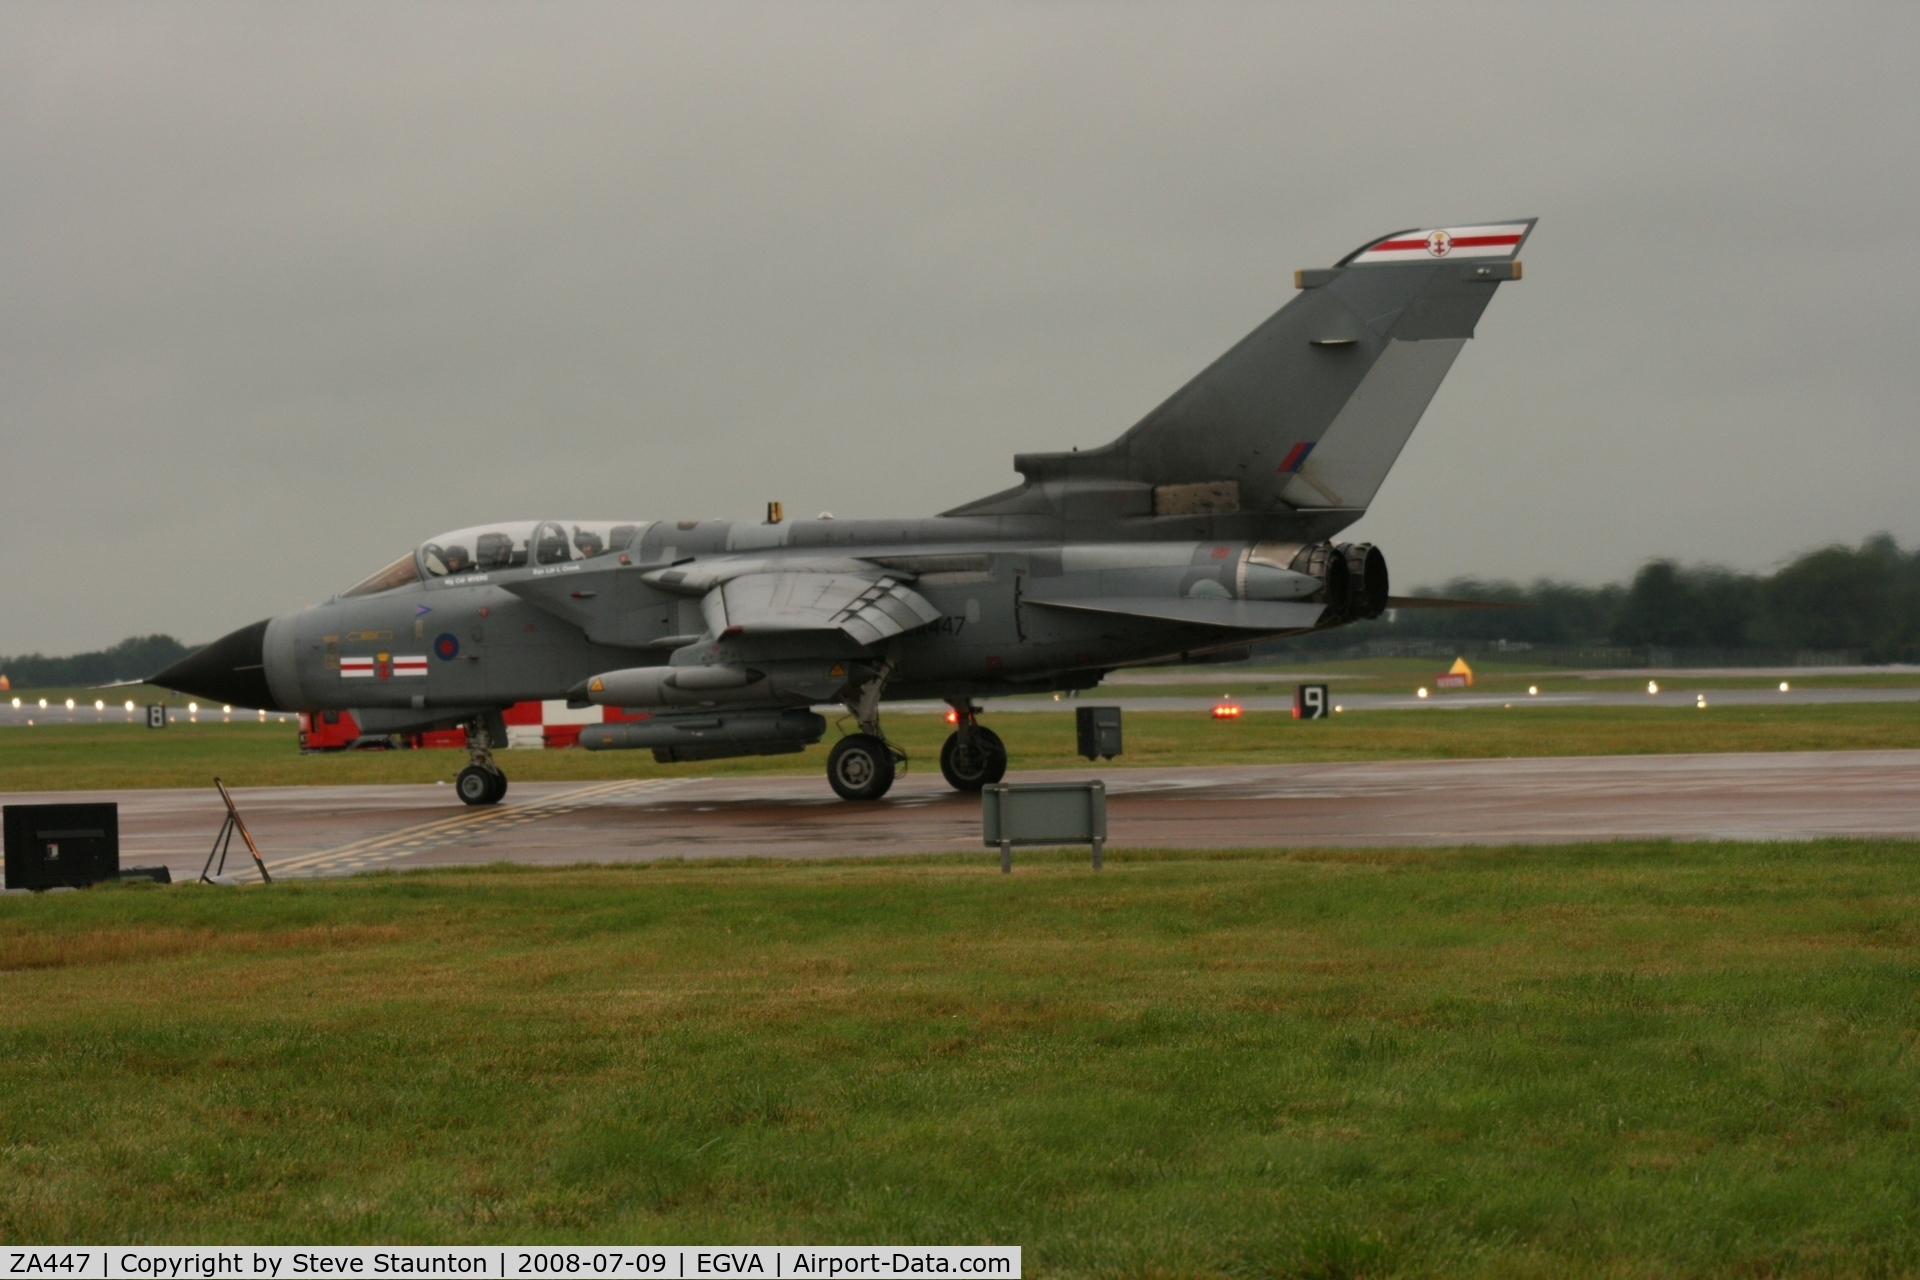 ZA447, 1983 Panavia Tornado GR.4 C/N 235/BS077/3113, Taken at the Royal International Air Tattoo 2008 during arrivals and departures (show days cancelled due to bad weather)